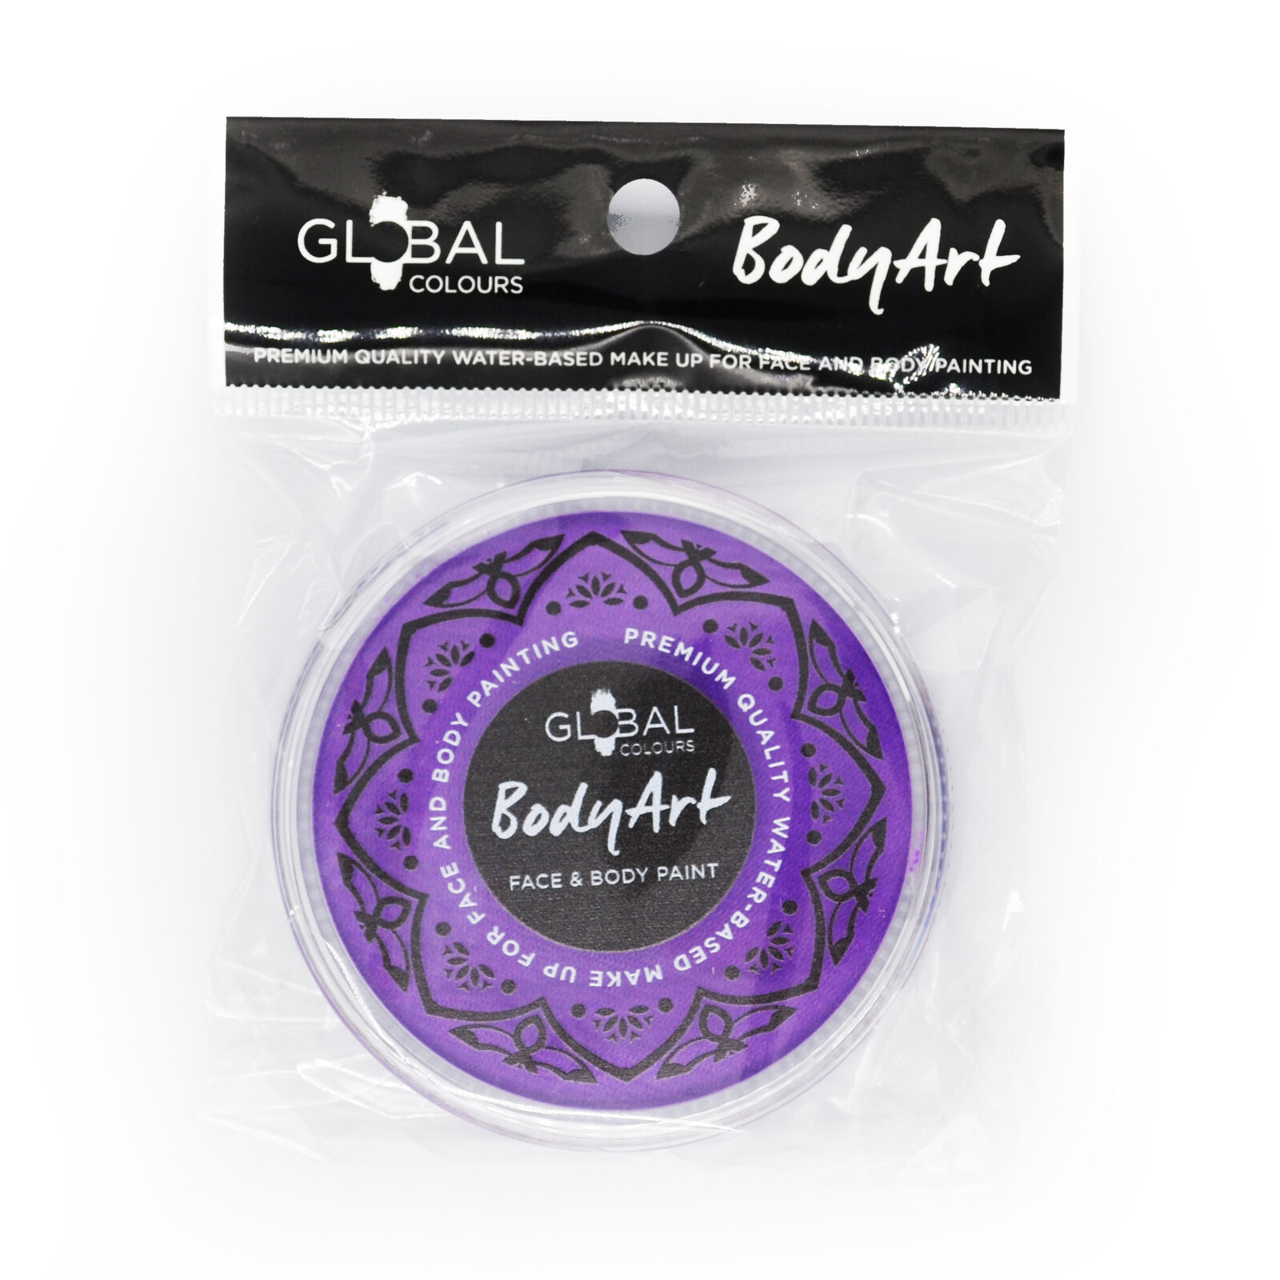 Picture of Global - Neon Purple - 32g